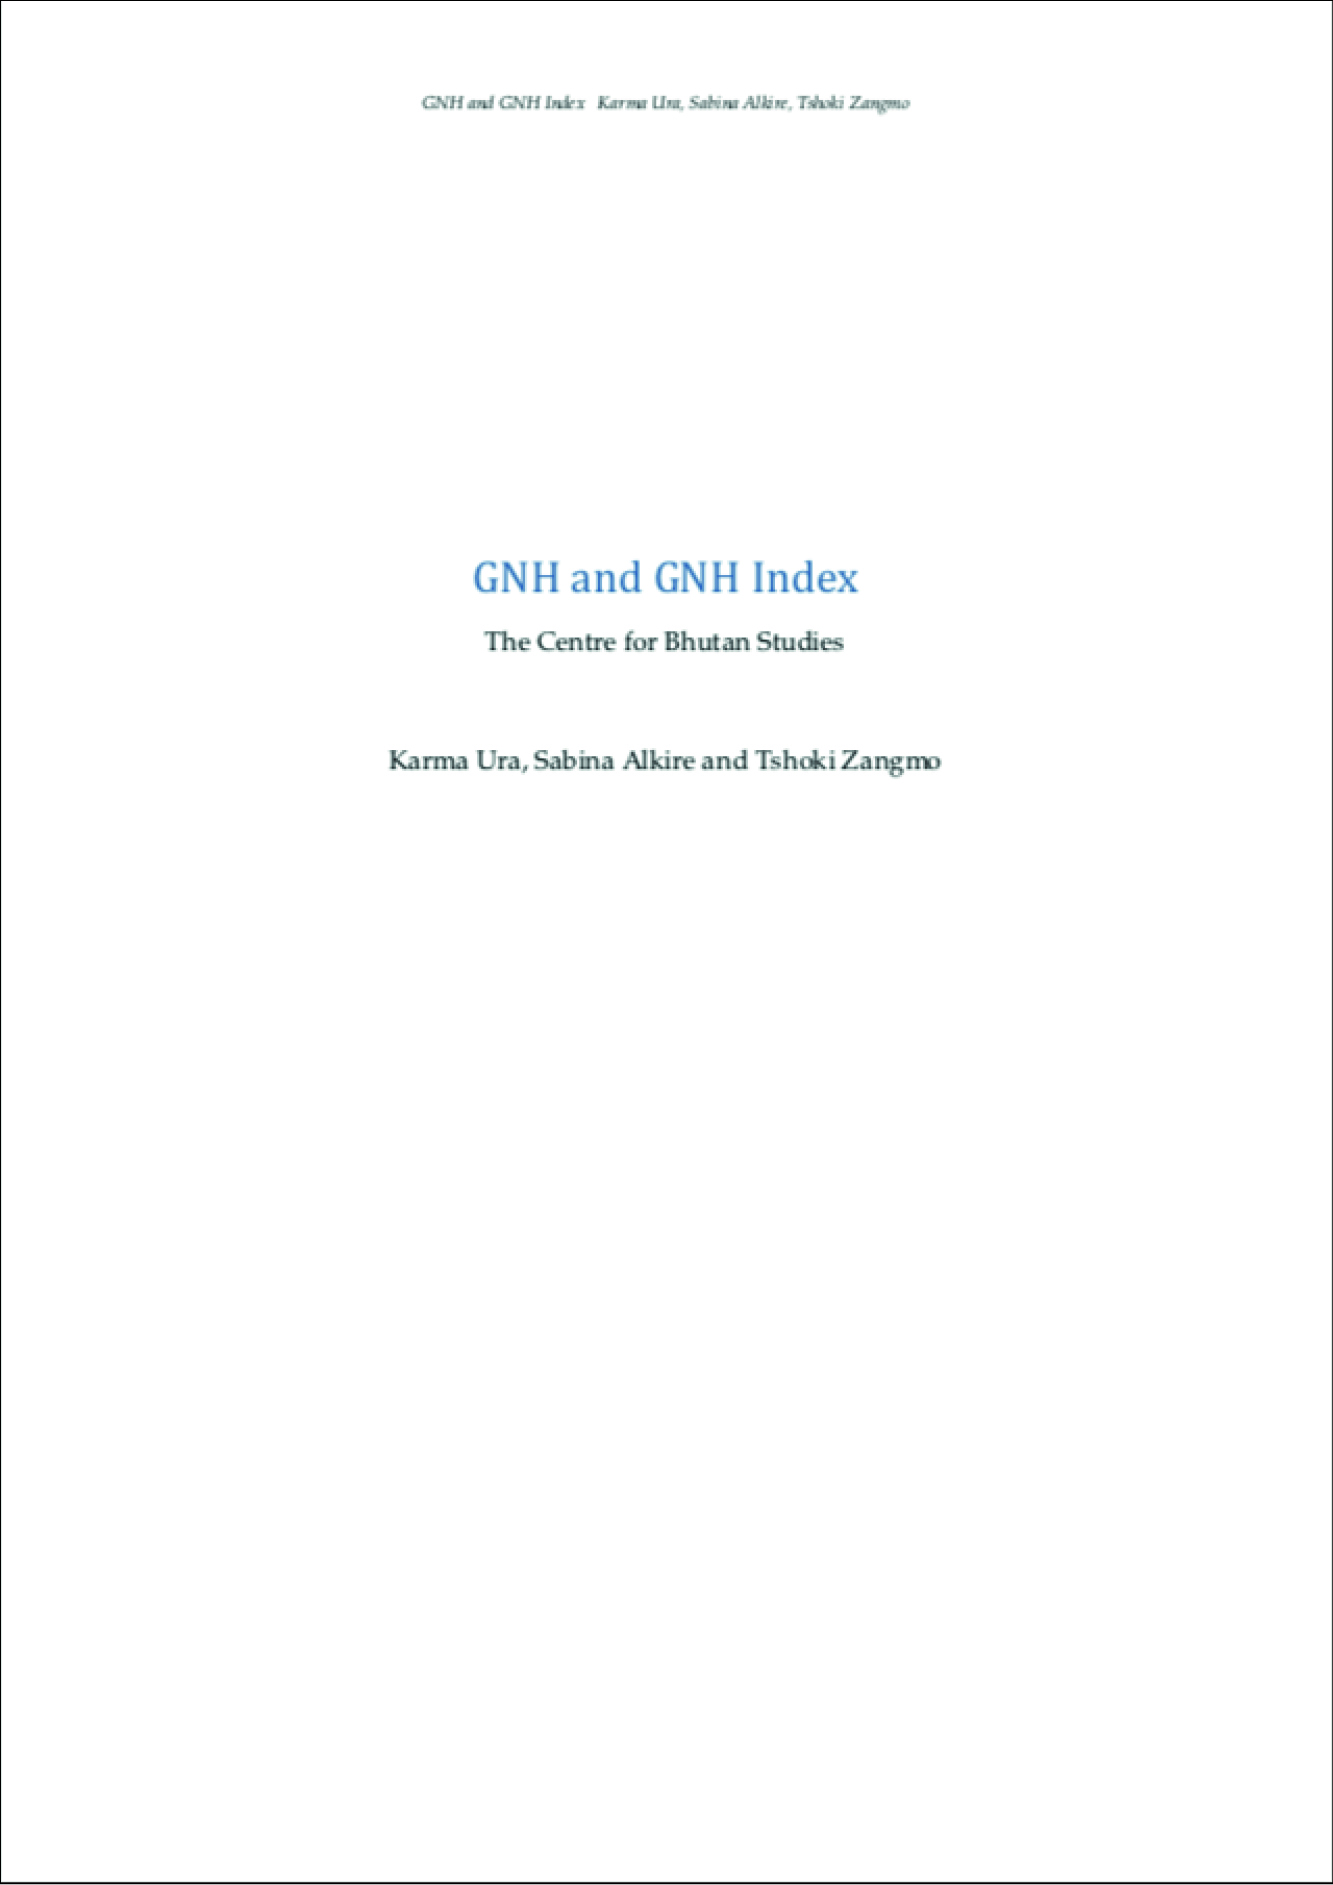 Bhutan GNH and GNH INdex 2012 cover image